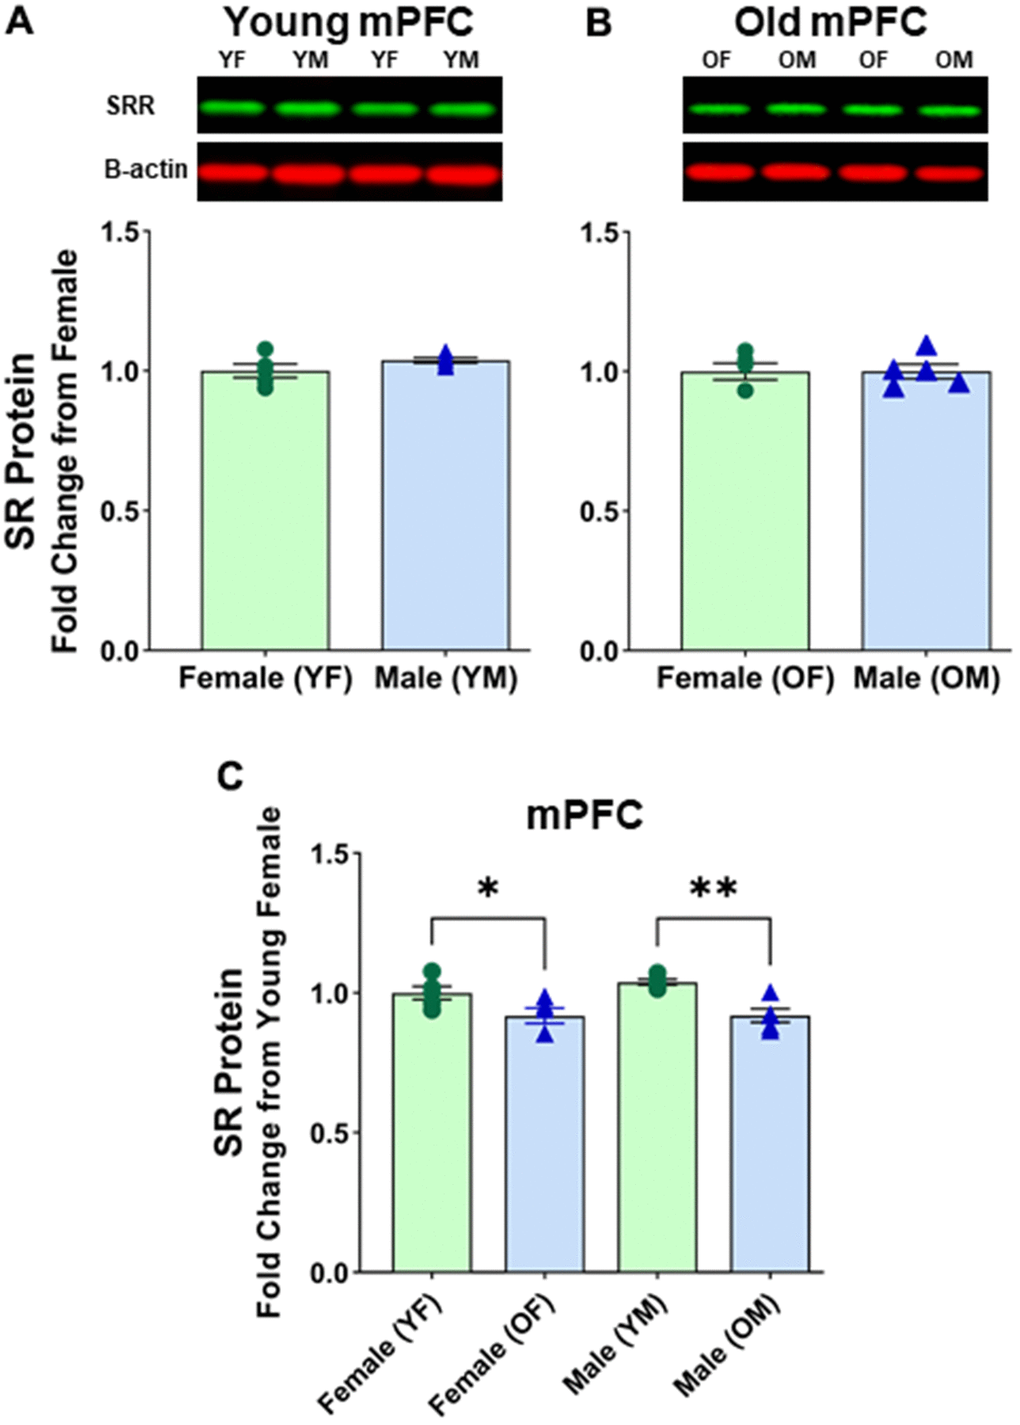 No sex differences in protein levels of serine racemase in the mPFC were observed. Western blots demonstrating expression of SR in (A) young female vs young male, and (B) old female vs old male. For A and B, fold changes were calculated from females for each age group. (C) depicts fold change of protein levels adjusted from young females. Bar graphs depict quantitative analysis of immunoreactivity for SR when normalized to total protein (see supplementary figure 3). The signal for B-actin is shown here for visual comparison only.